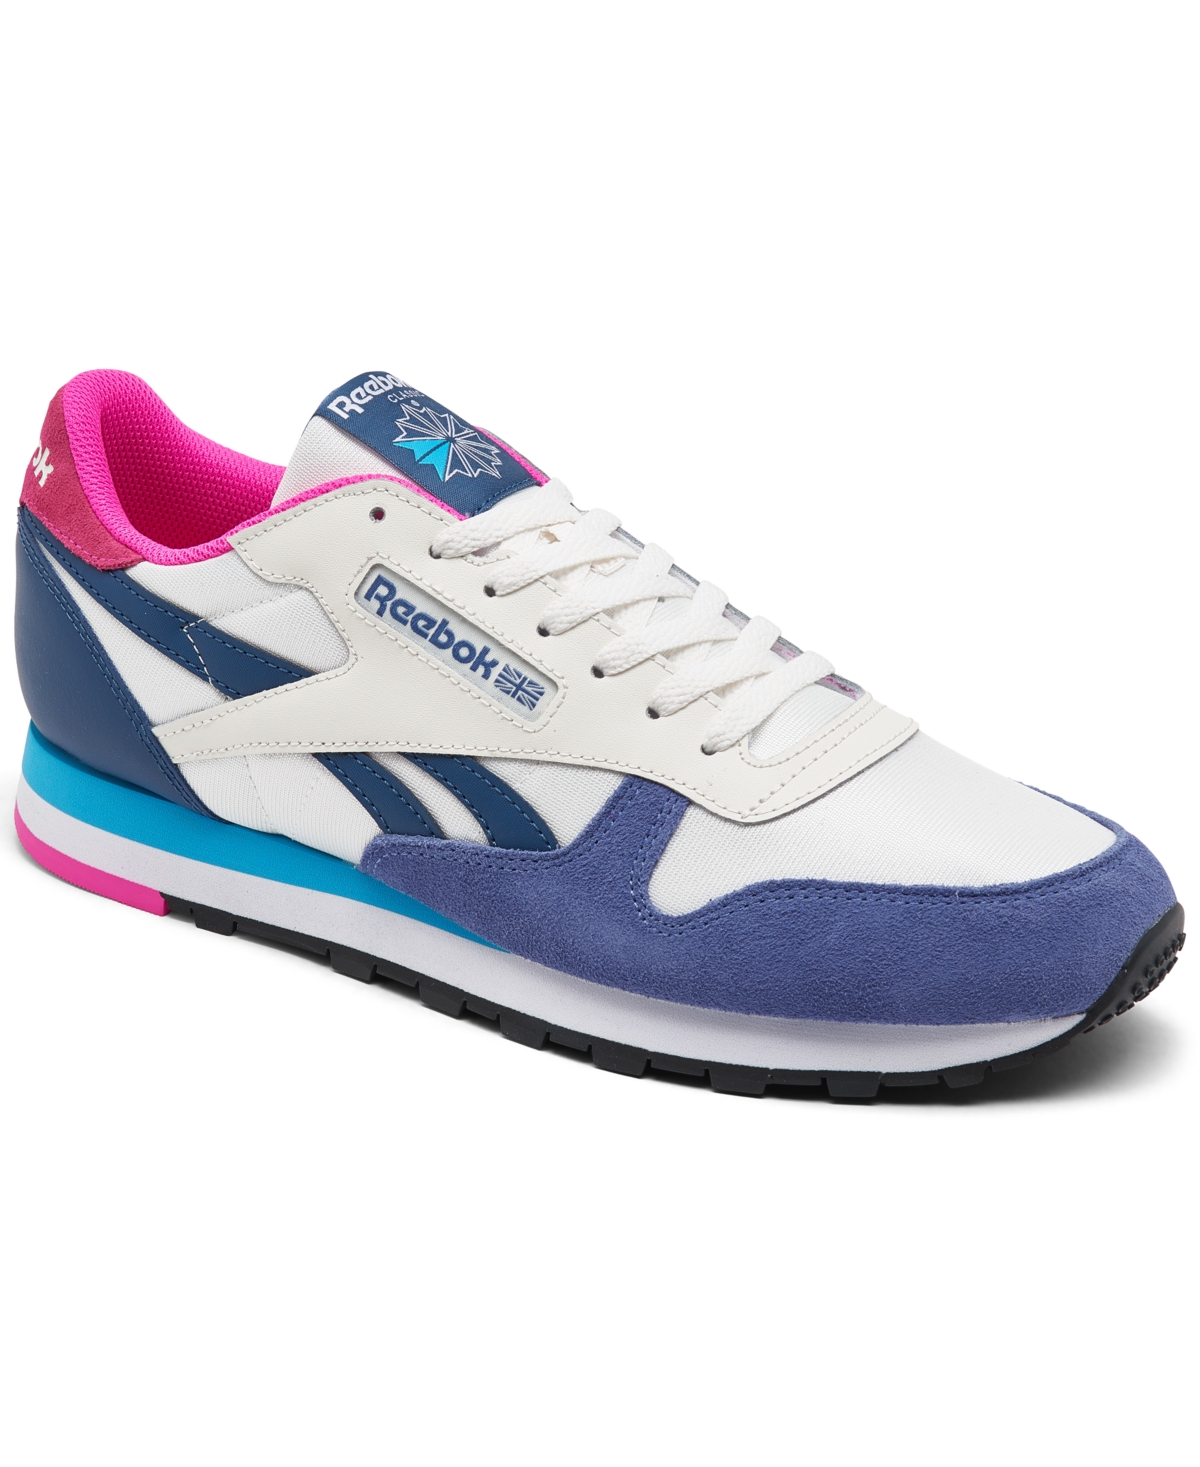 Men's Classic Nylon Casual Sneakers from Finish Line - Chalk/blue/purple/pink